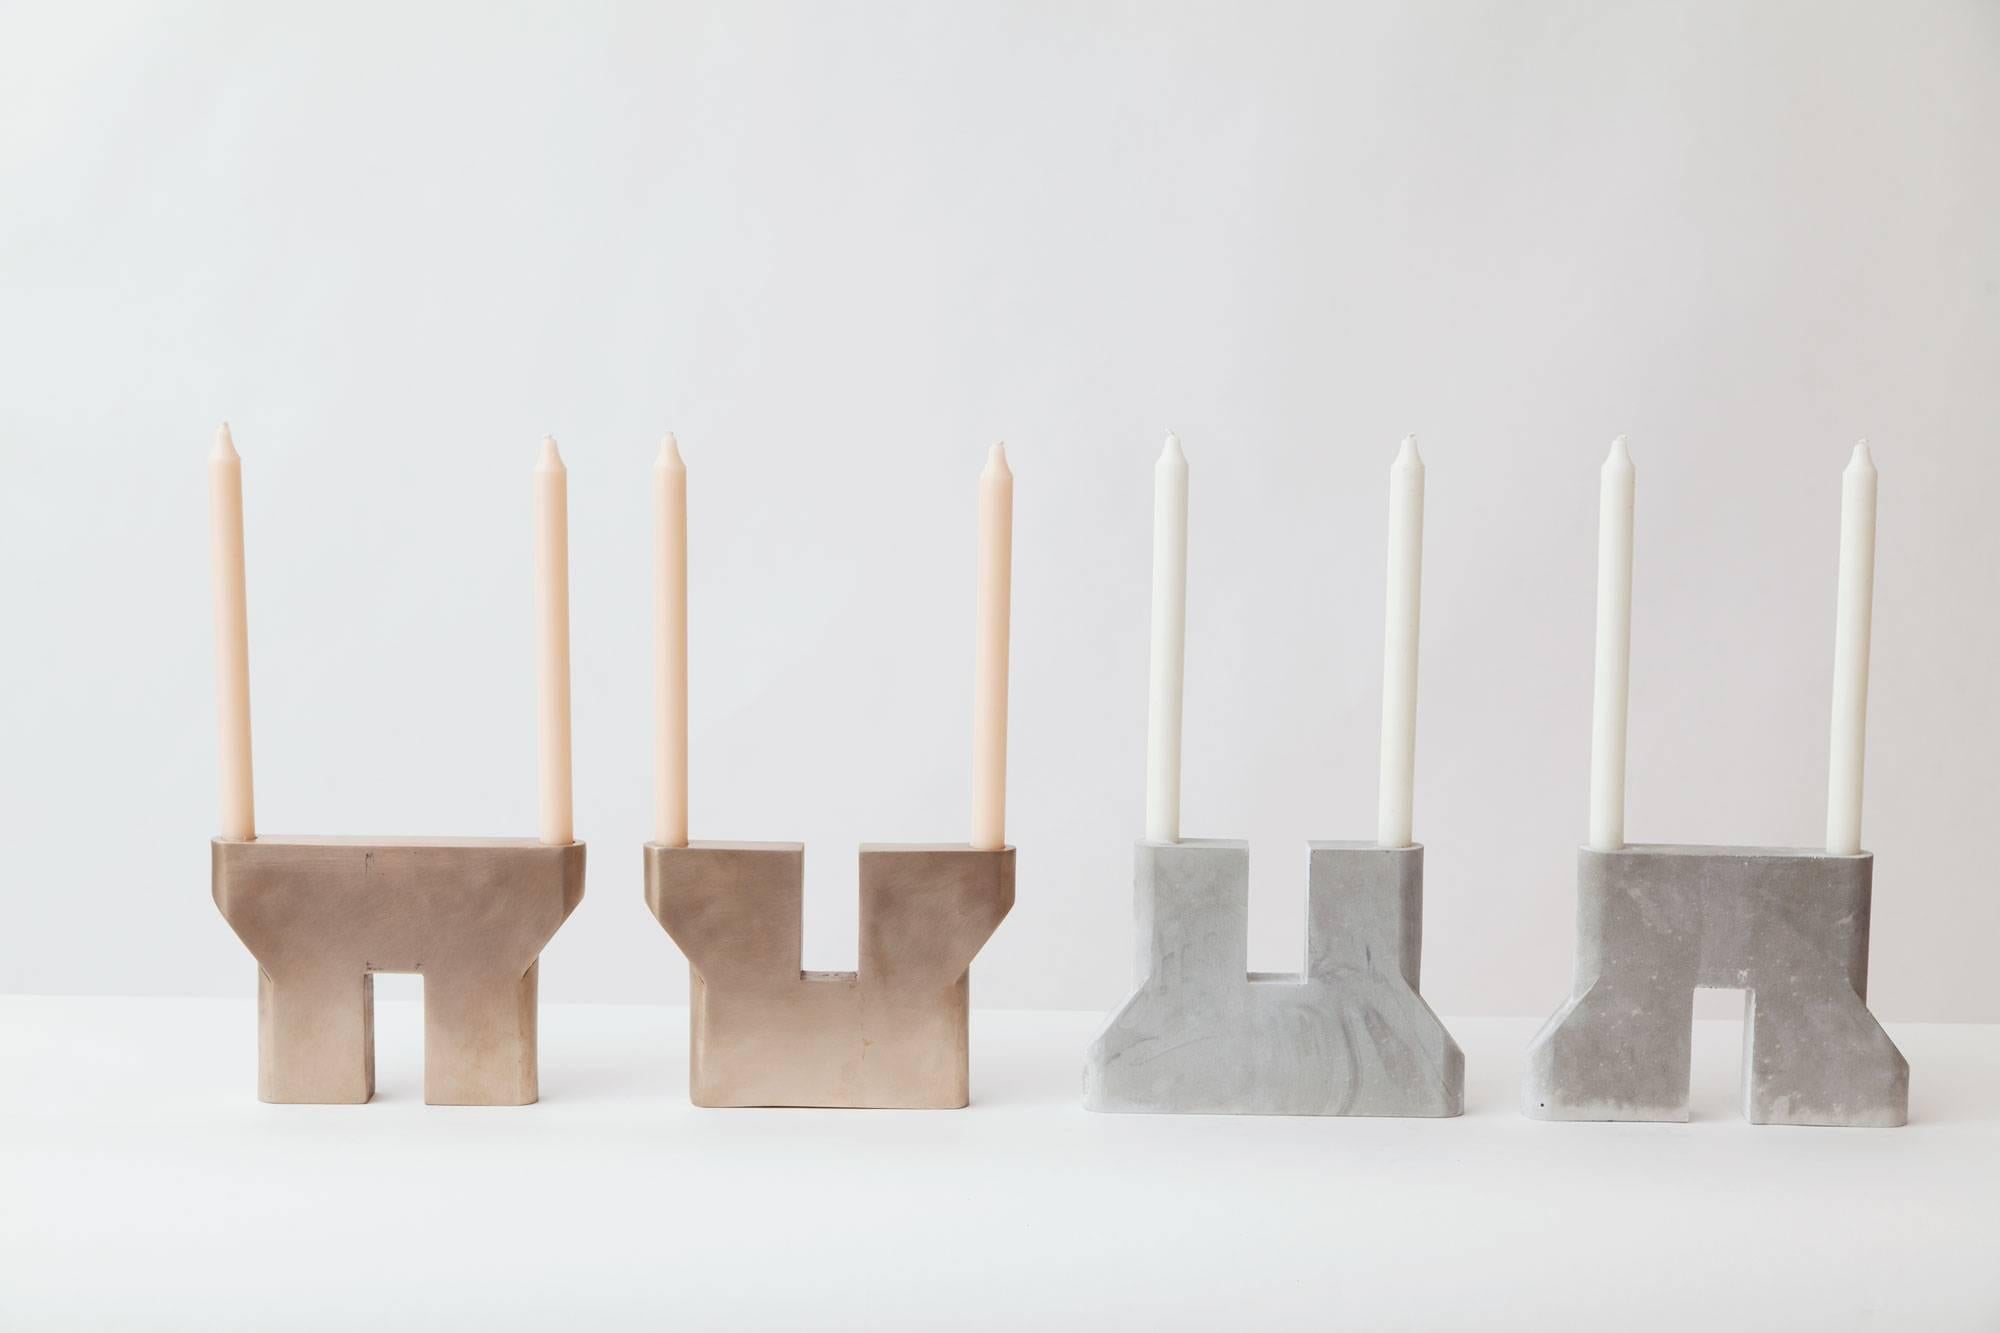 Not So General Gallery in Los Angeles is proud to present the Dune candelabra in Concrete from Brooklyn-based design studio Vonnegut Kraft which is a set of two interlocking, modular pieces that can be displayed separately or together. The